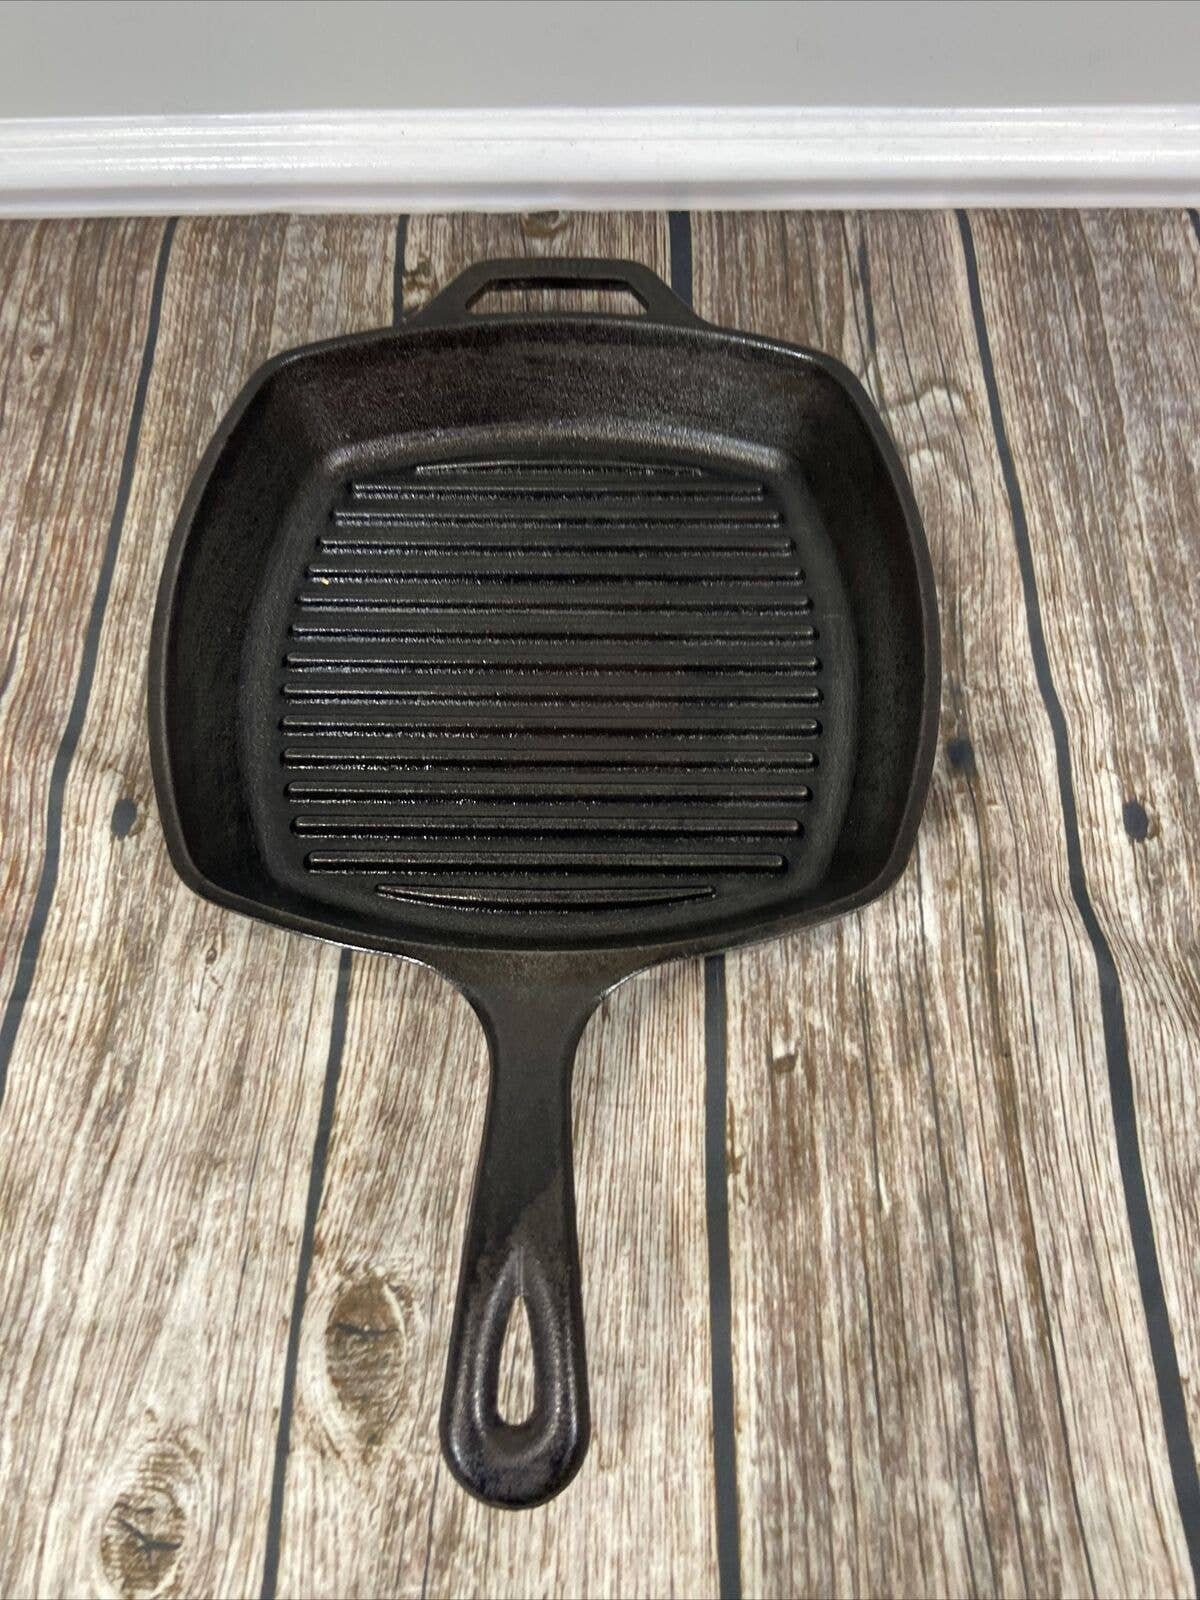 Lodge Square Cast Iron Grill Pan - 10-1/2